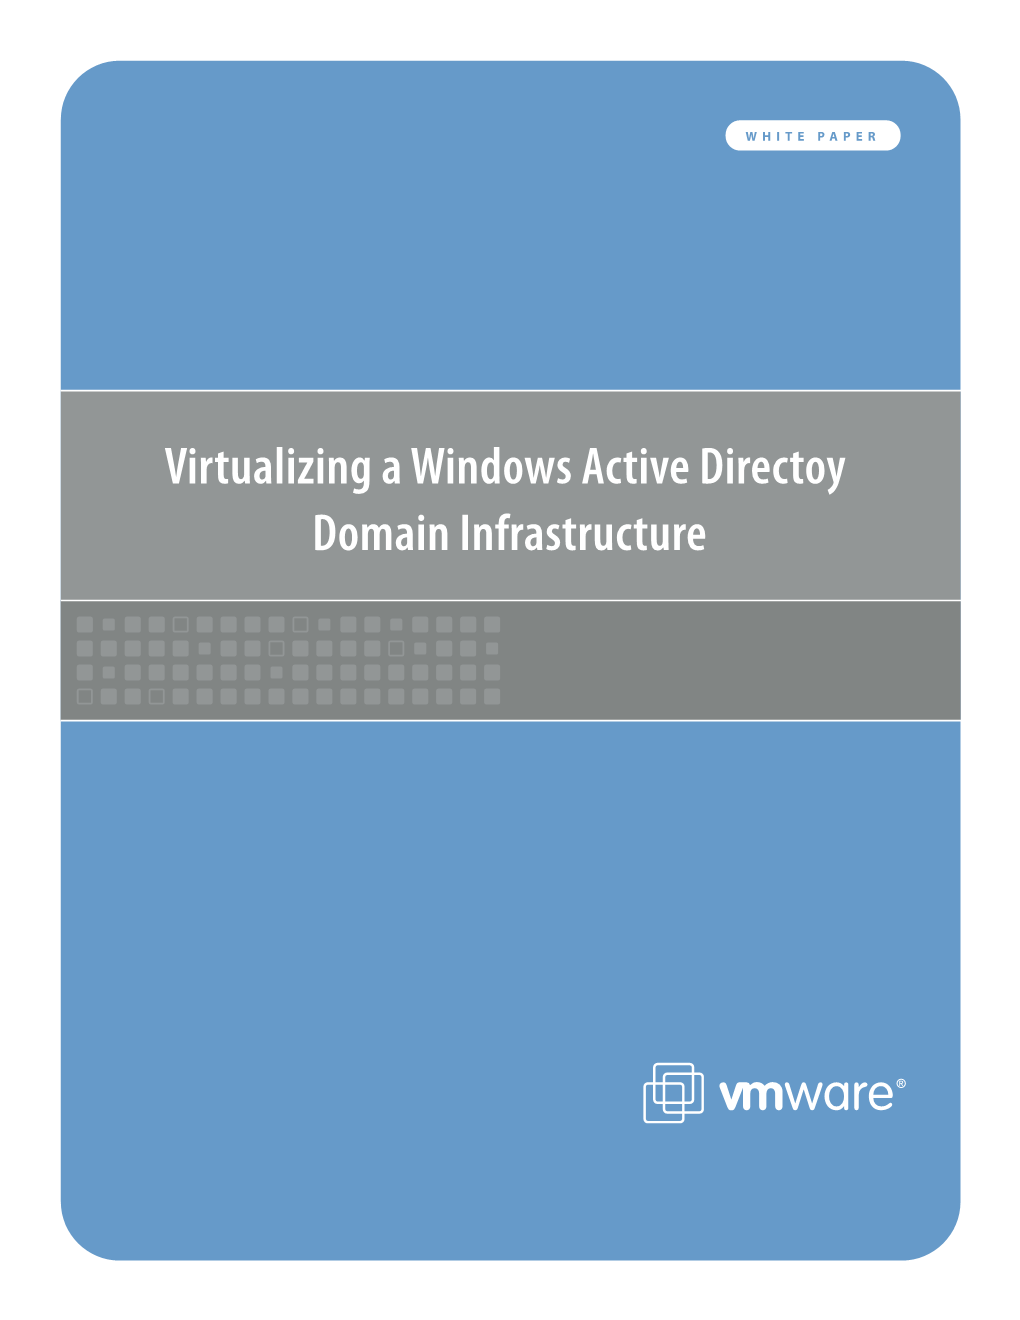 Virtualizing a Windows Active Directory Domain Infrastructure